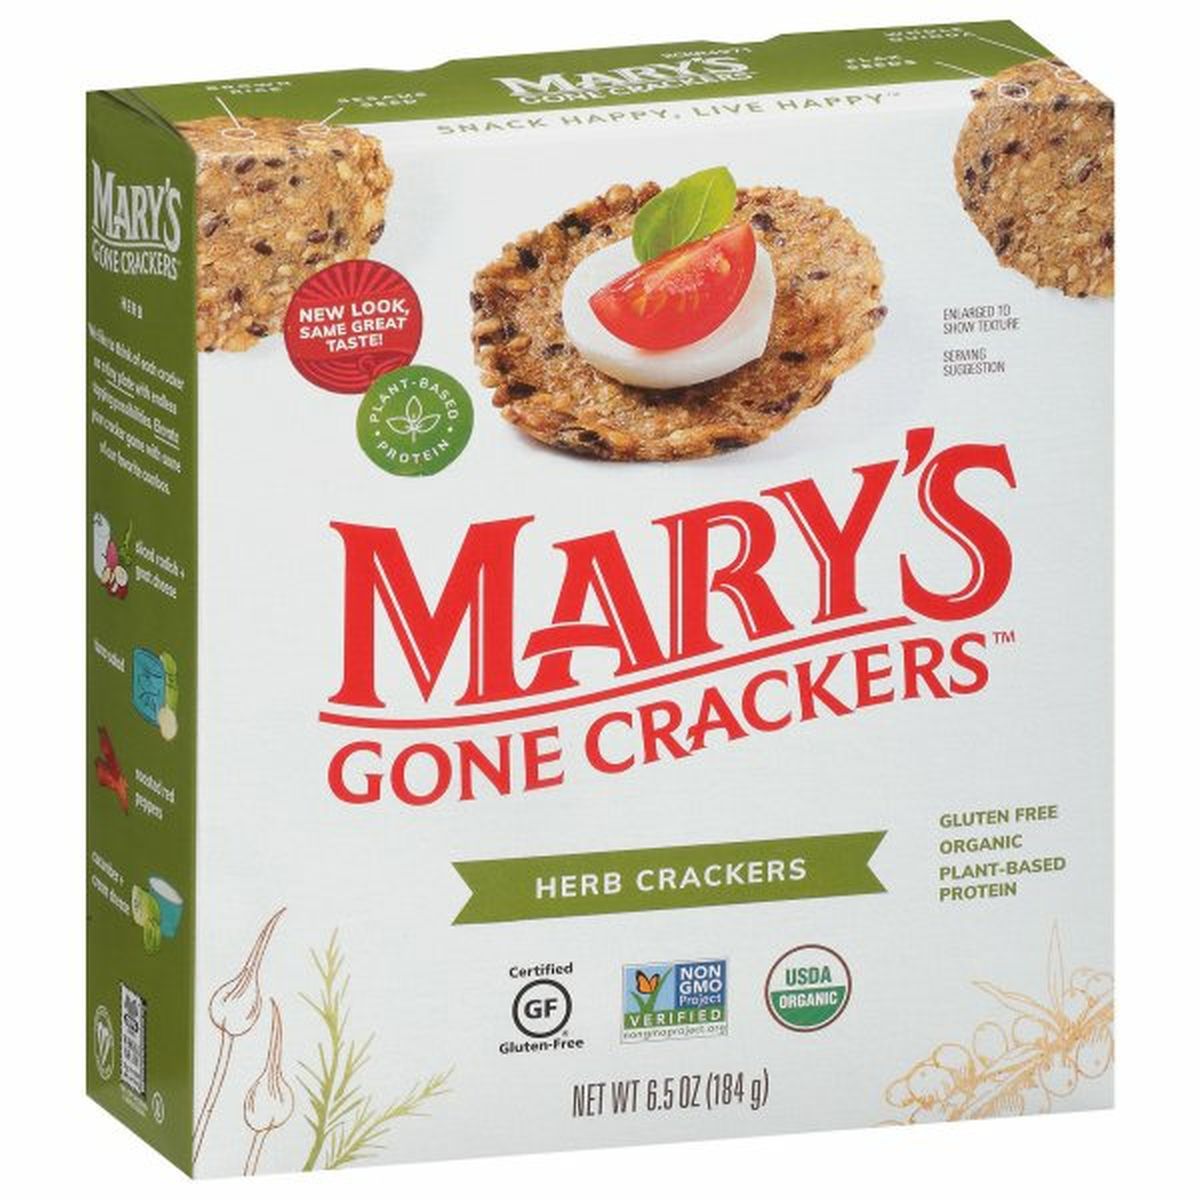 Calories in Mary's Gone Crackers Crackers, Herb